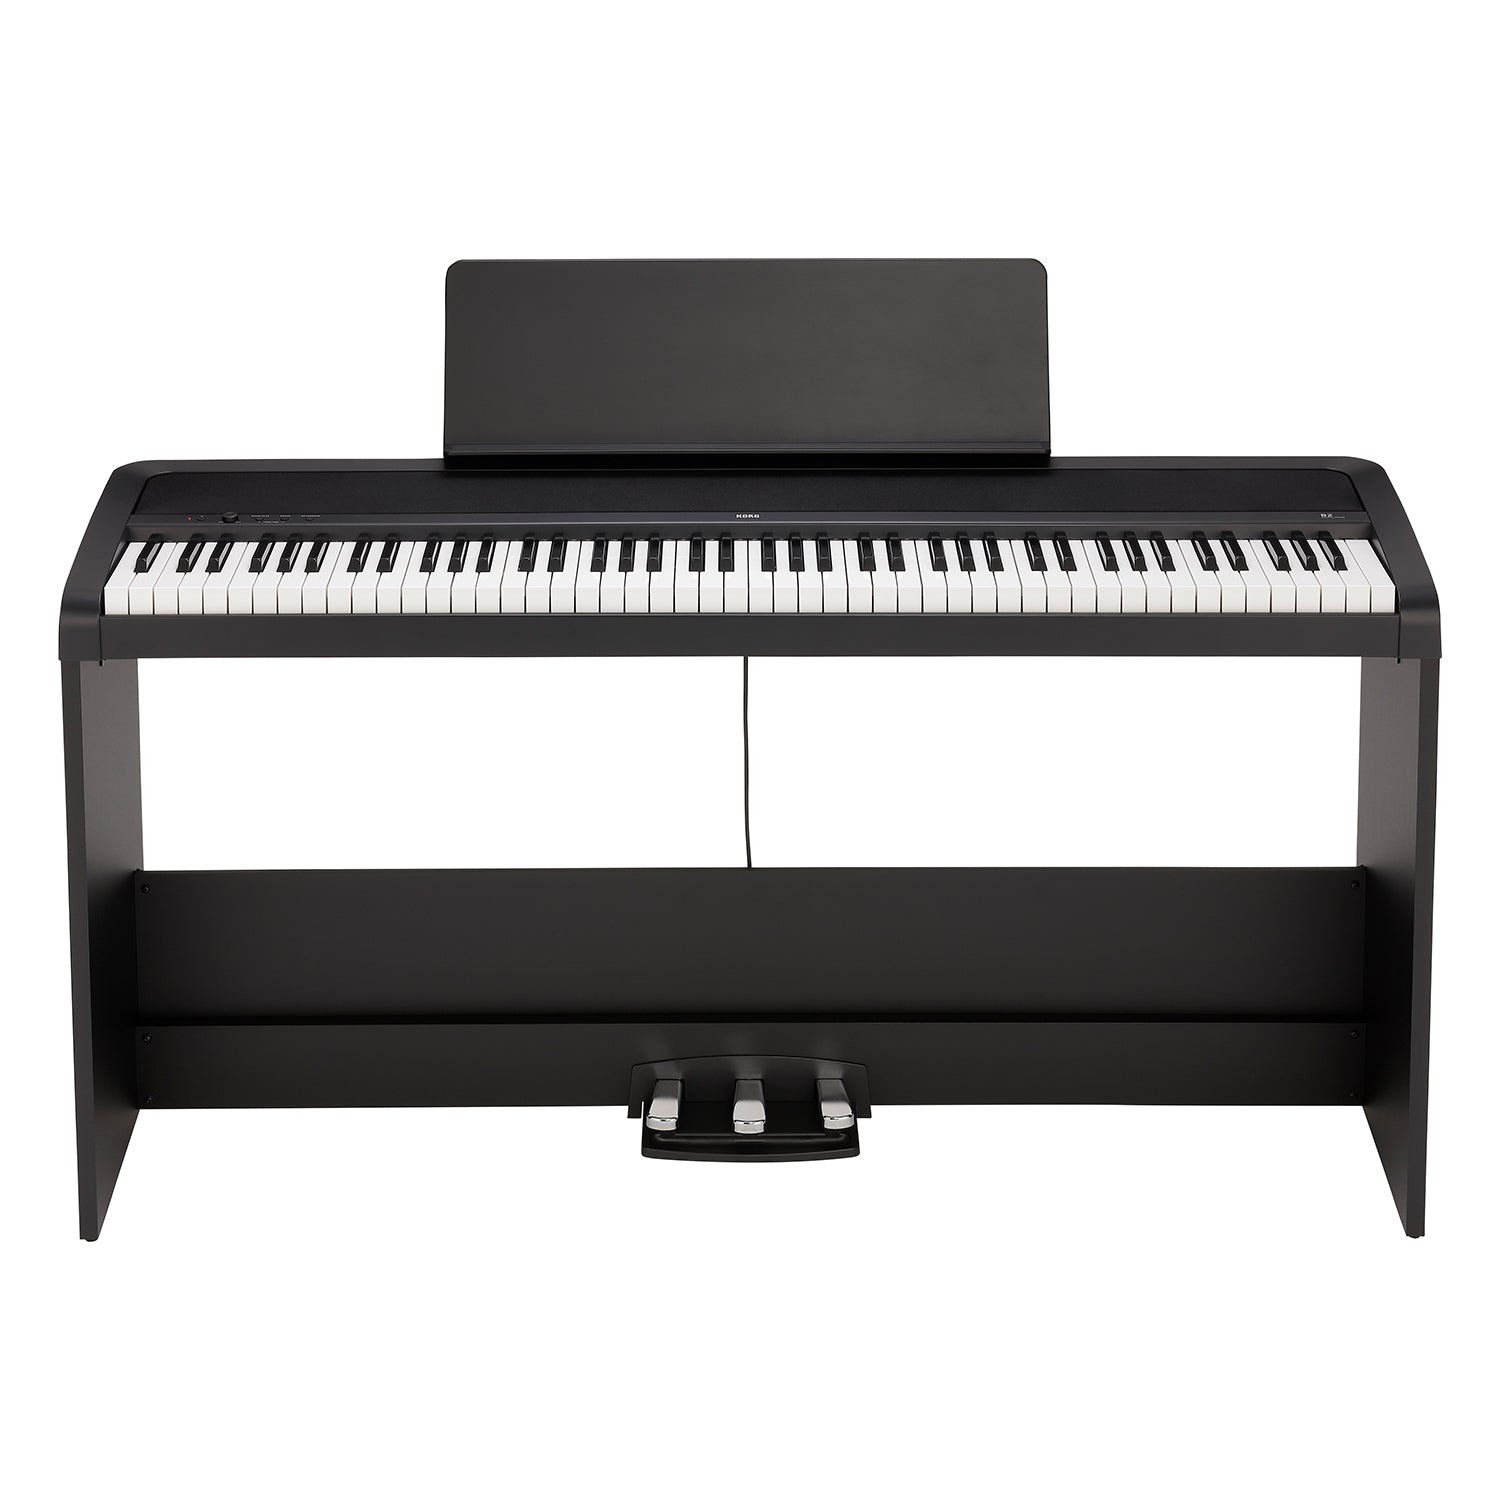 B2 Digital Piano with Stand - Black KORG USA Official Store